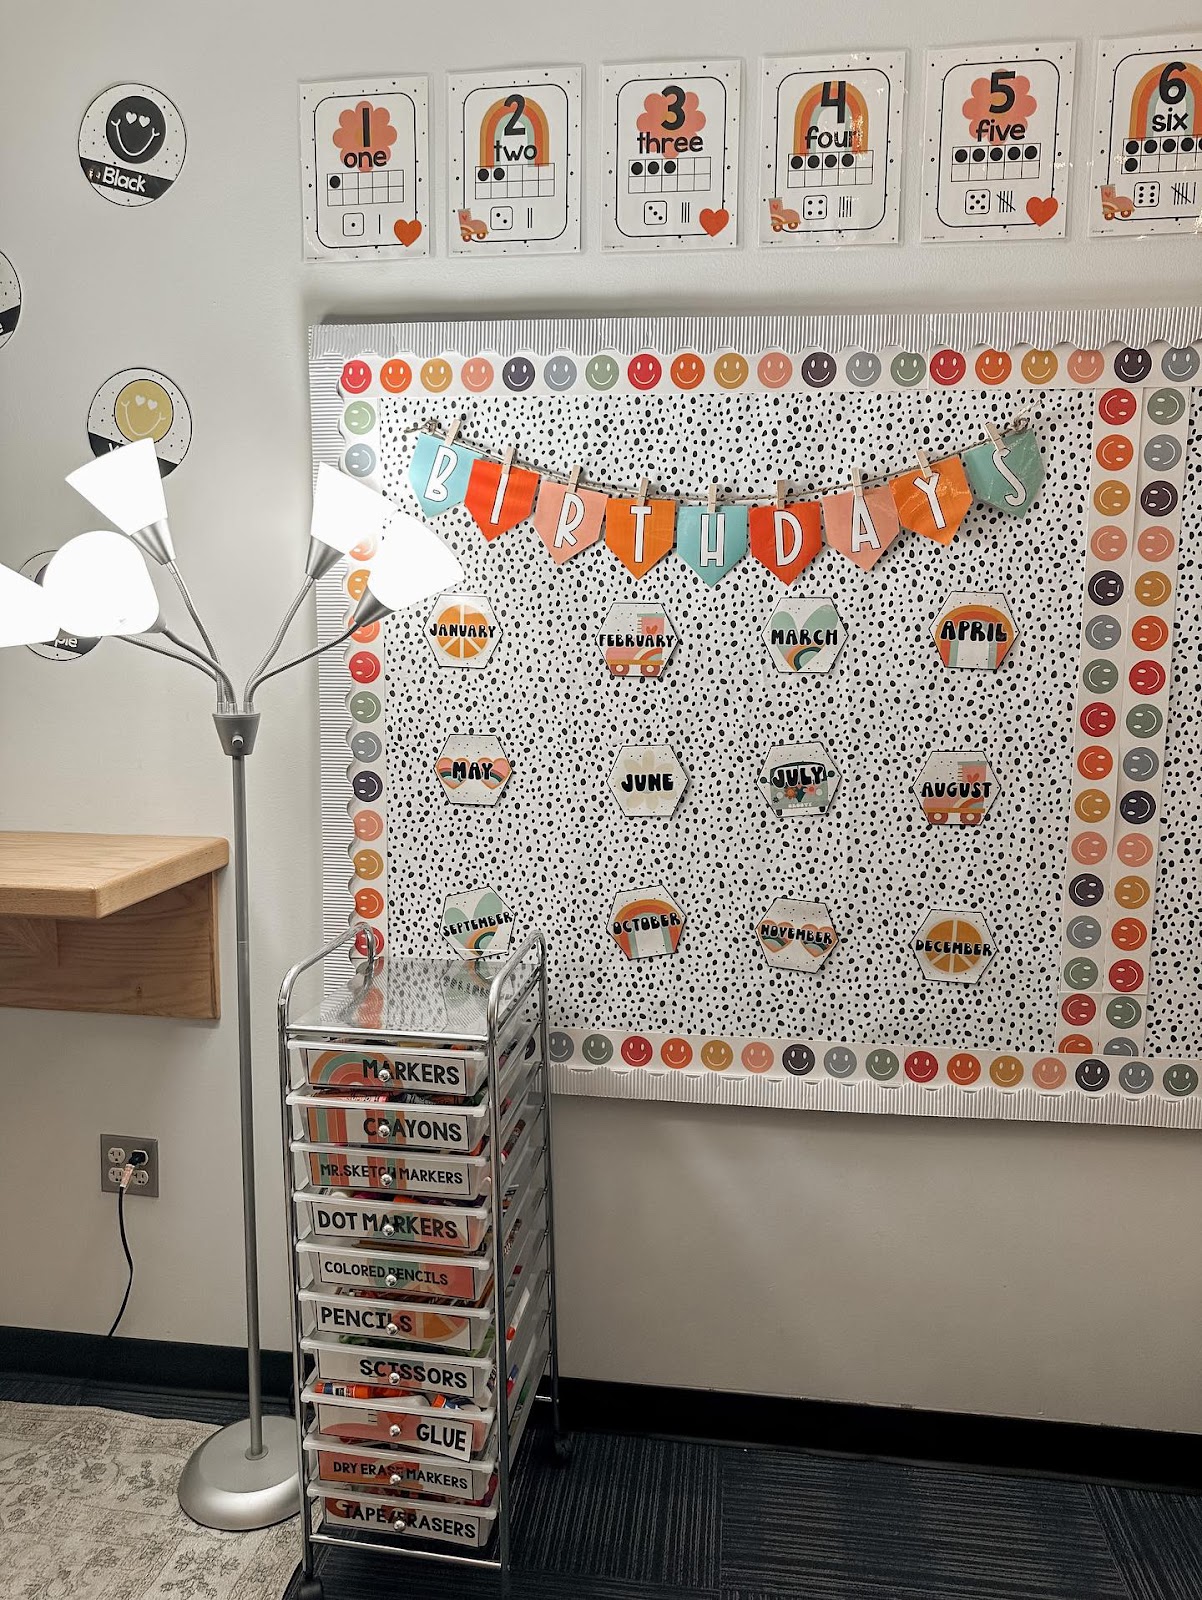 This image shows a birthday display on a bulletin board decorated with retro colors and images. 